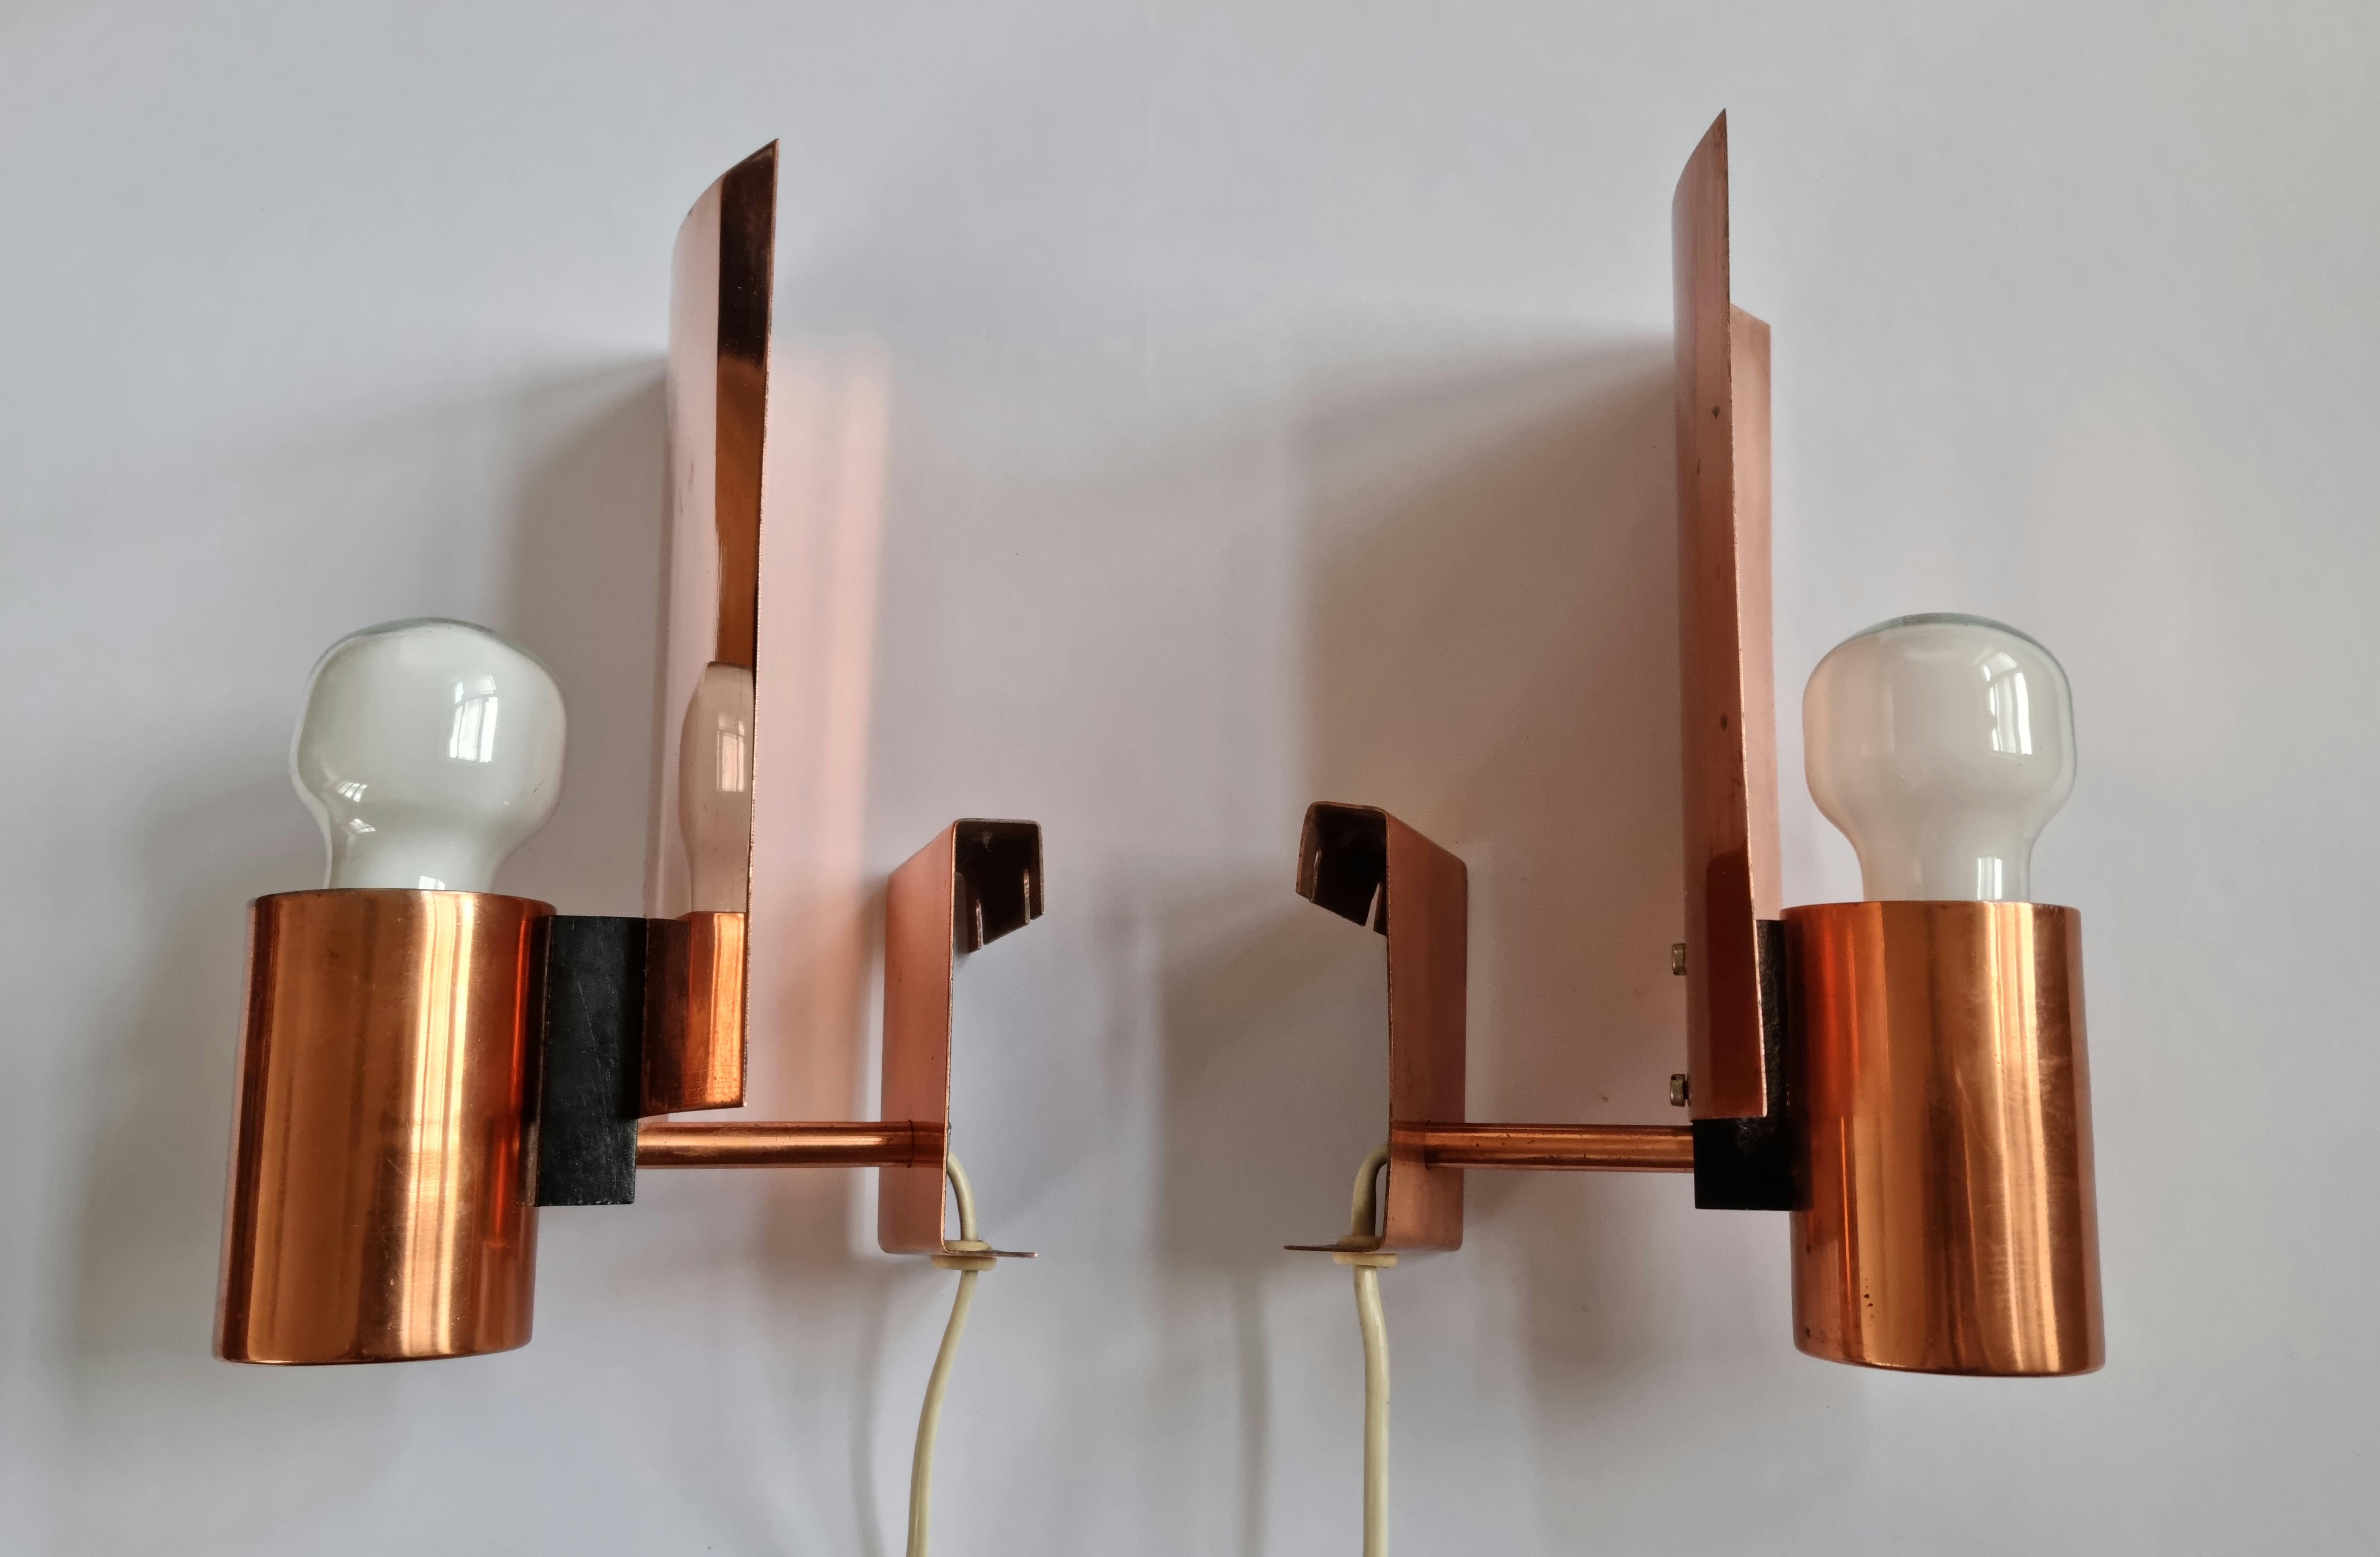 Pair of Midcentury Copper Wall Lamps, Denmark, 1960s For Sale 8